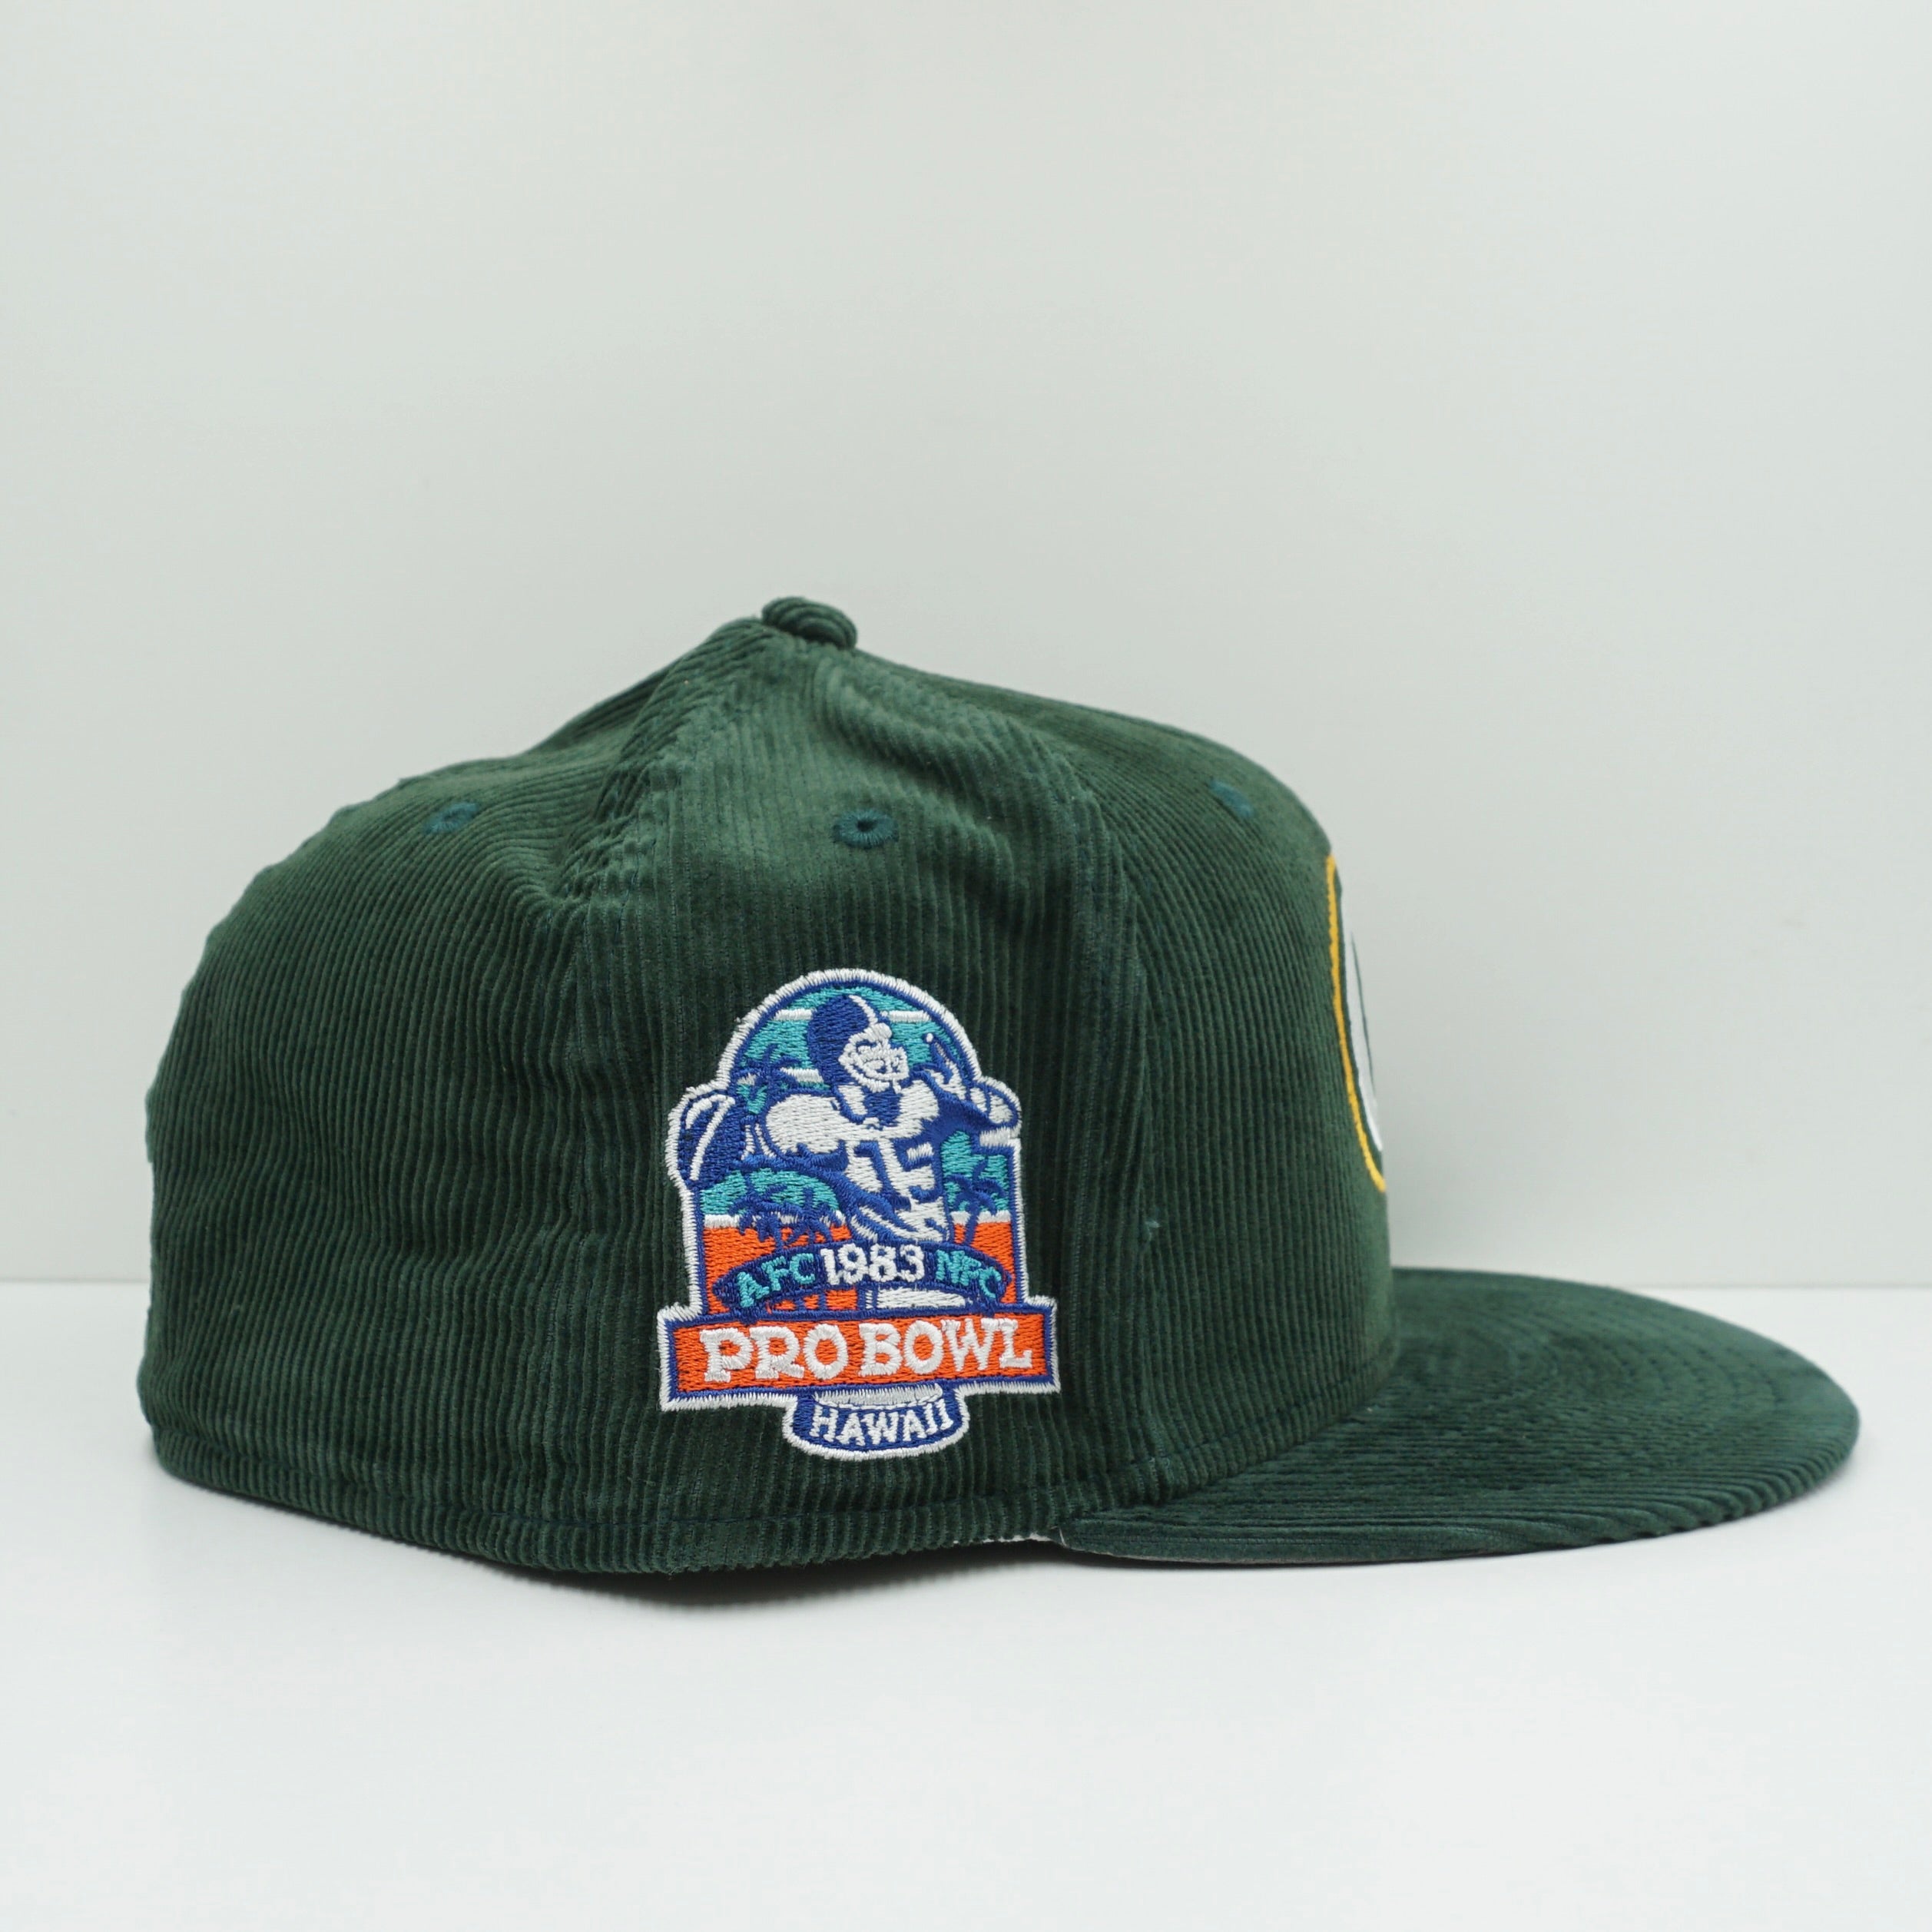 New Era Green Bay Packers Throwback Corduroy Fitted Cap